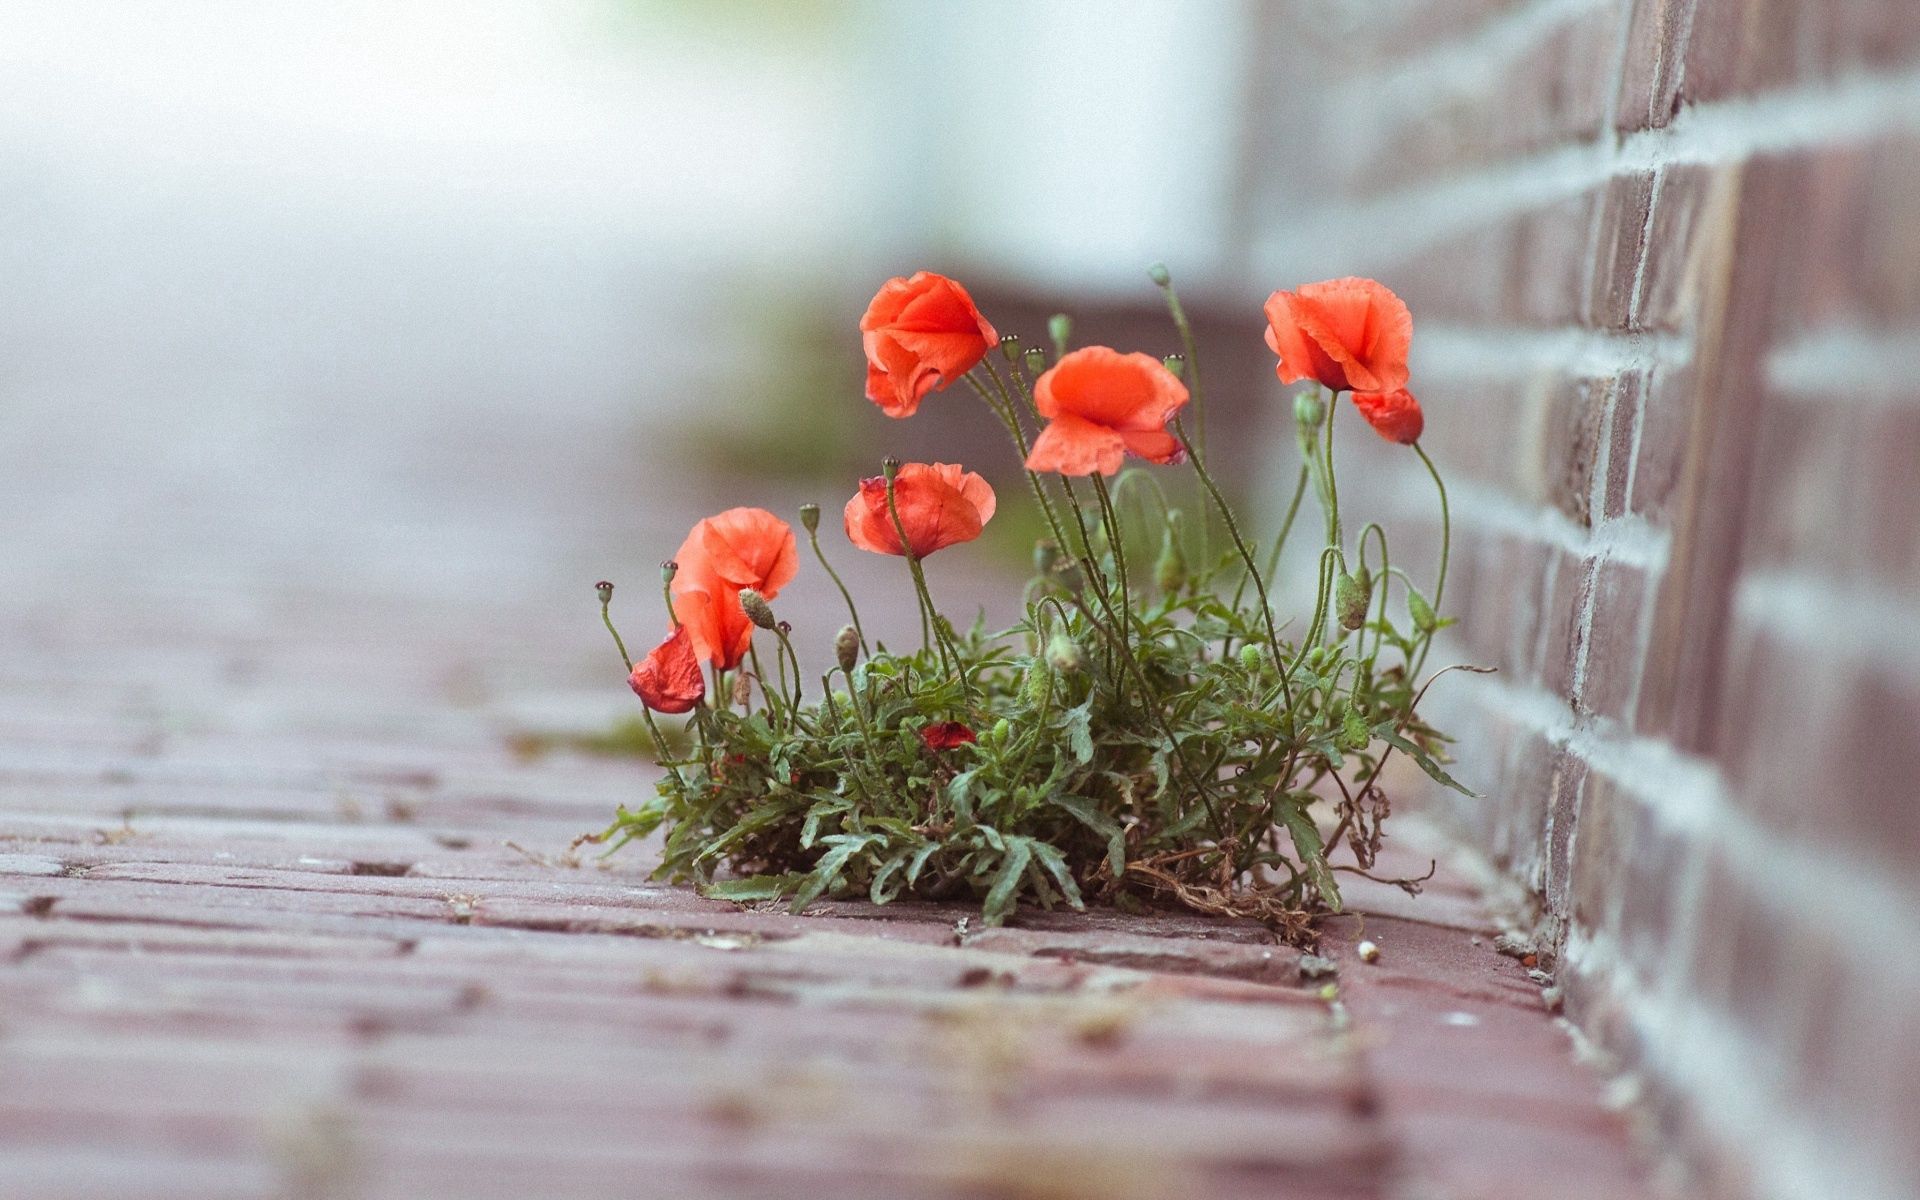 flowers, poppies, greens, bricks, street wallpapers for tablet